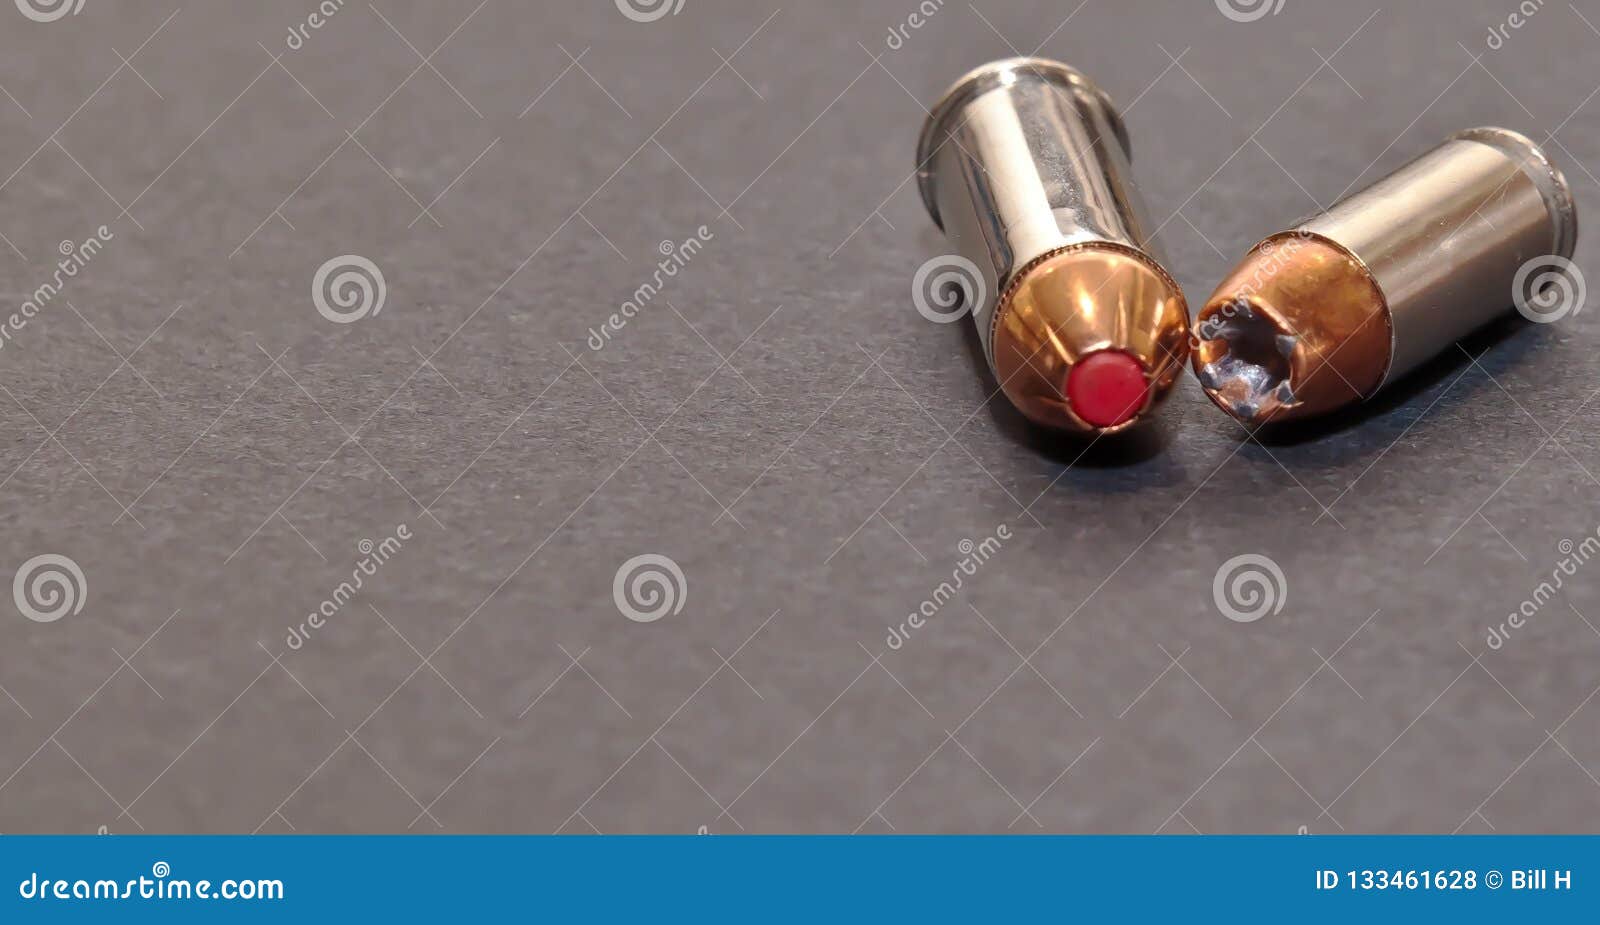 A 40 Caliber Hollow Point Bullet And A 44spl Red Tipped Bullet Laying Toget...